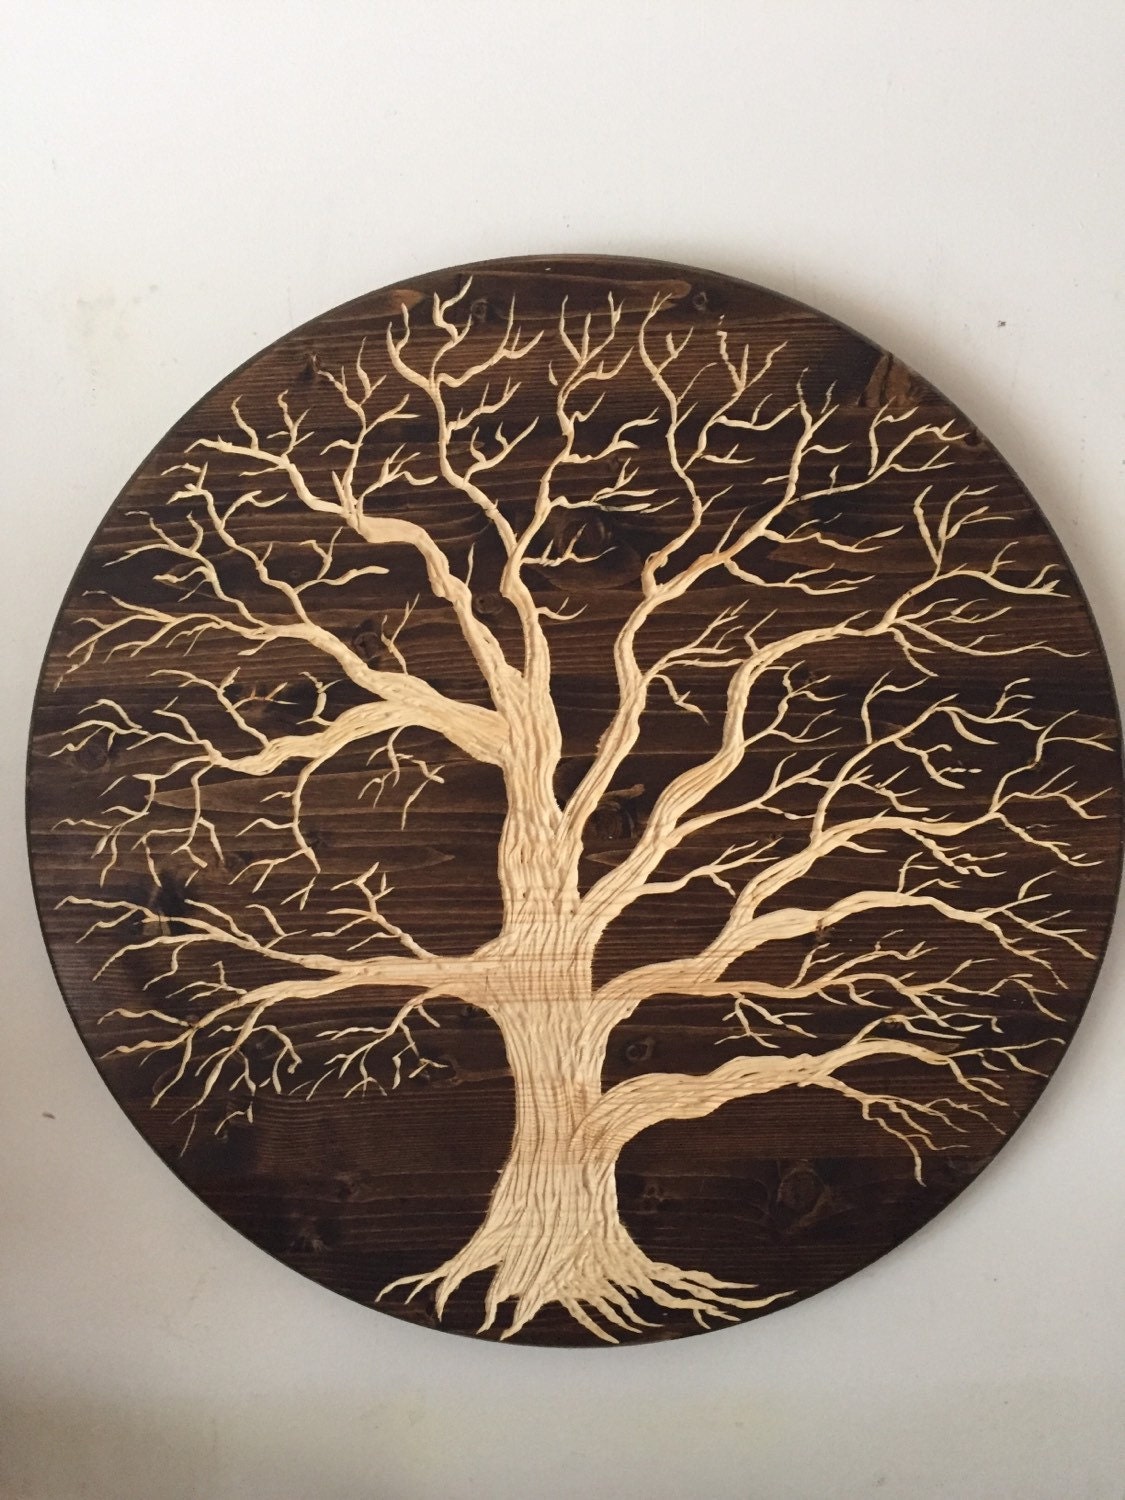 LARGE oak tree of life 24in across wood carved wall art